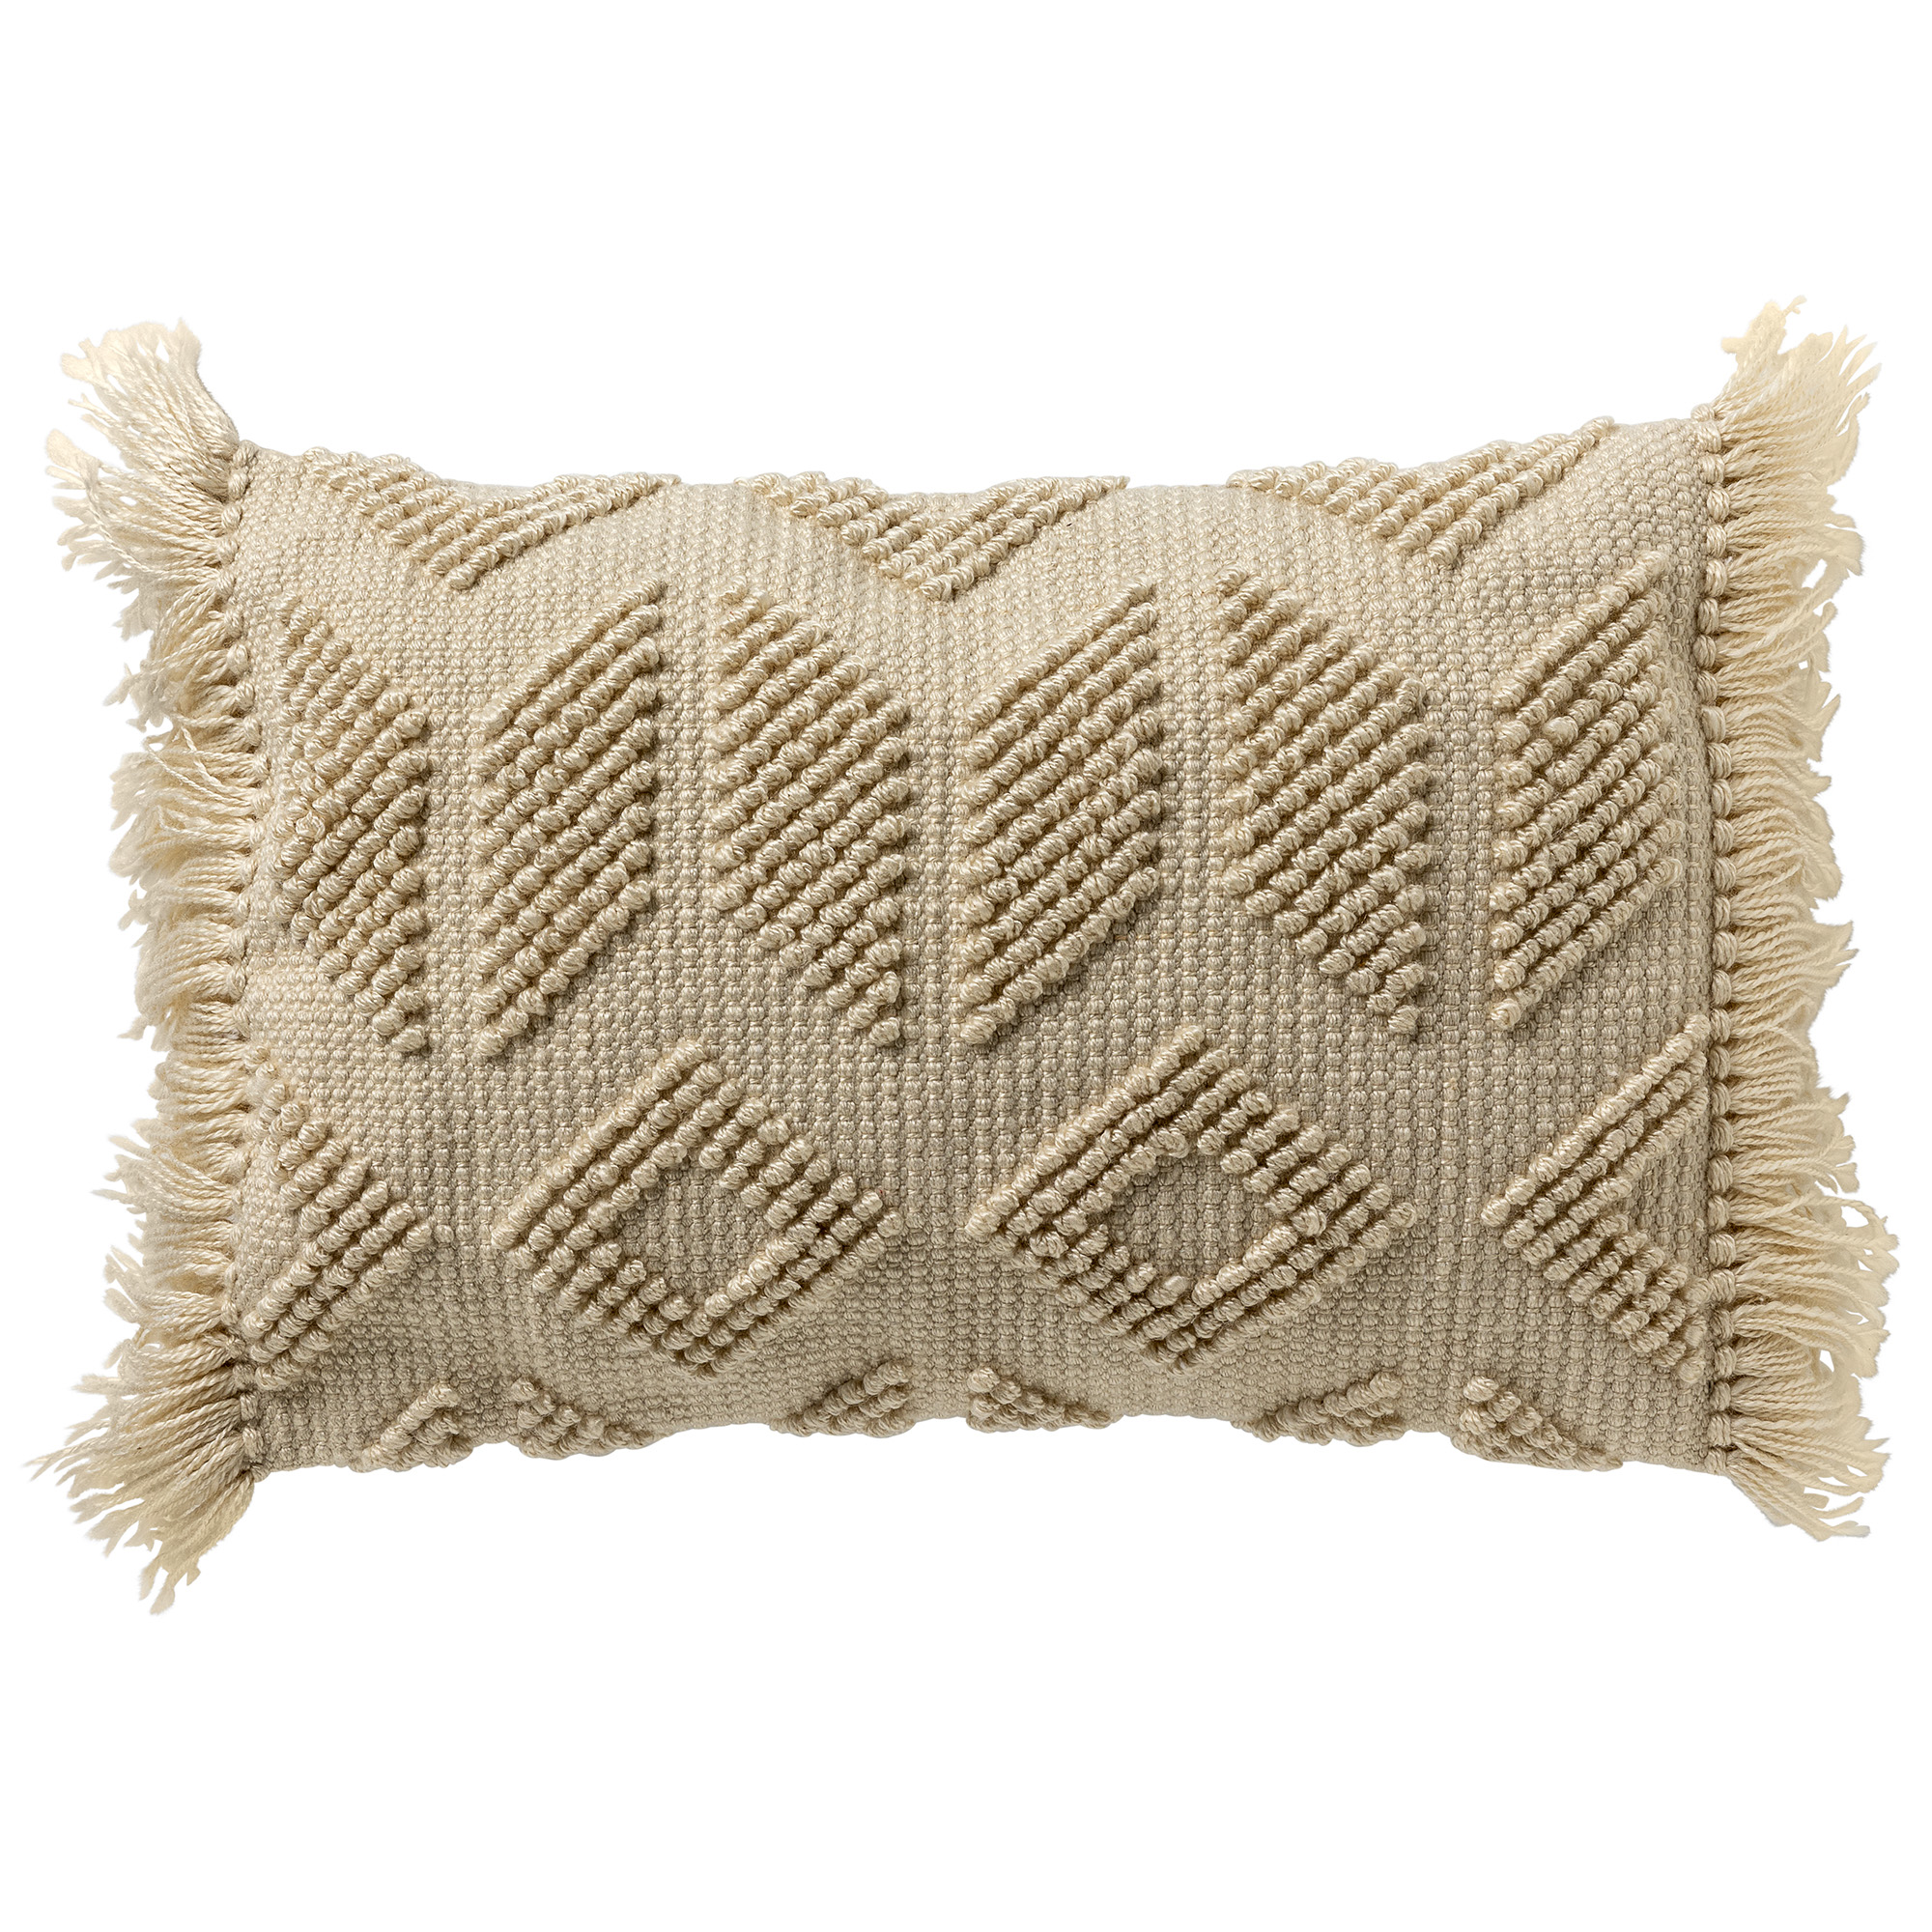 ODIN - Cushion 40x60 cm with cushion cover made of 90% recycled polyester - Eco Line collection - Pumice Stone - beige